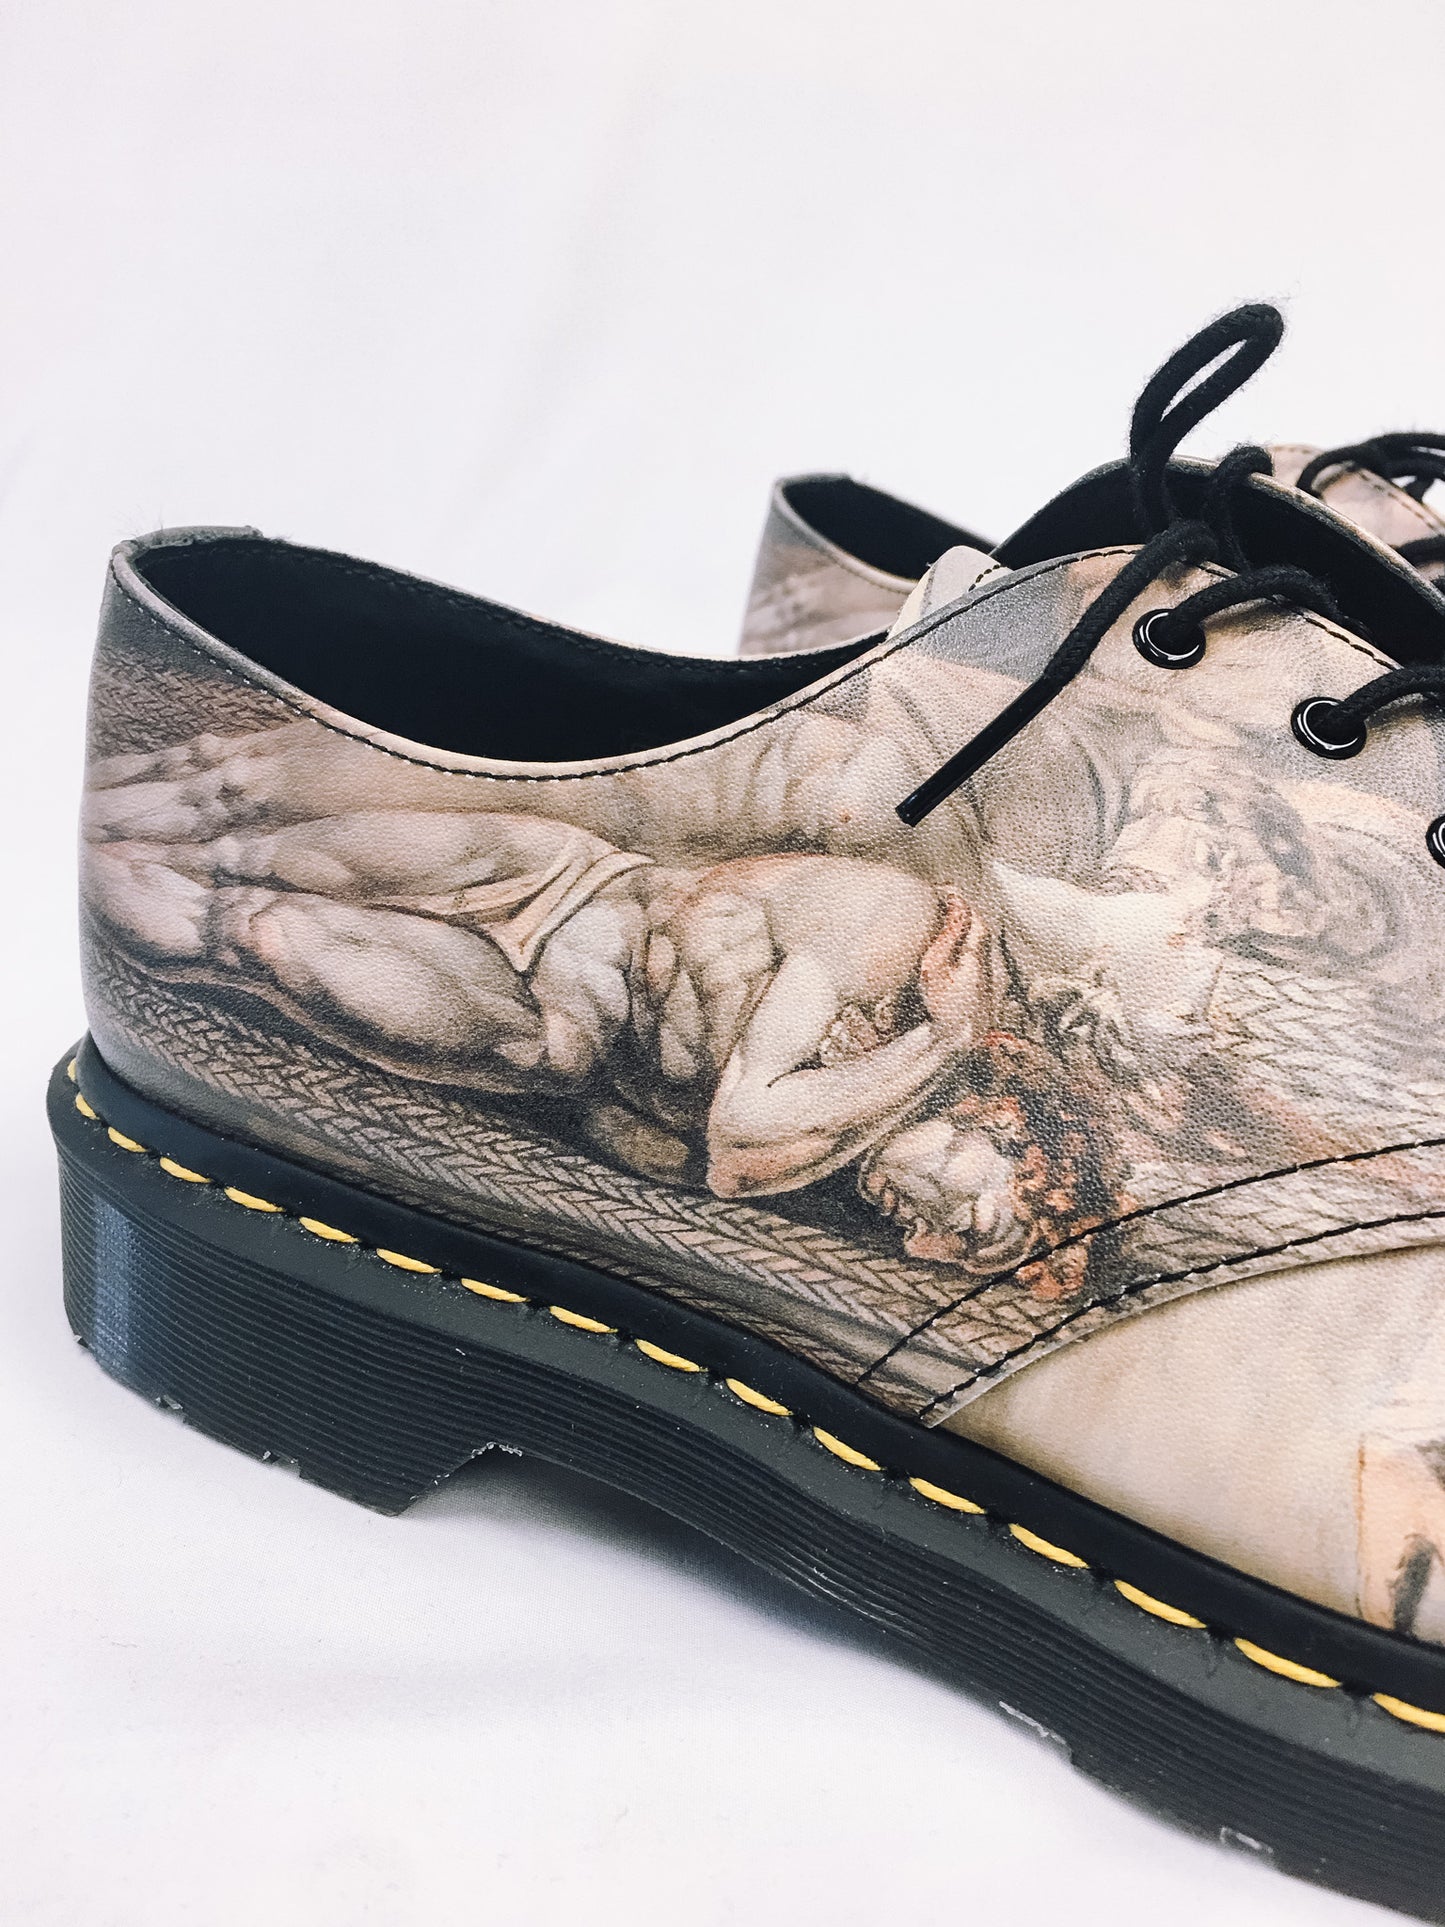 Dr. Martens 1461 x William Blake "House of Death" Oxford Loafers, Men's Sz. 12